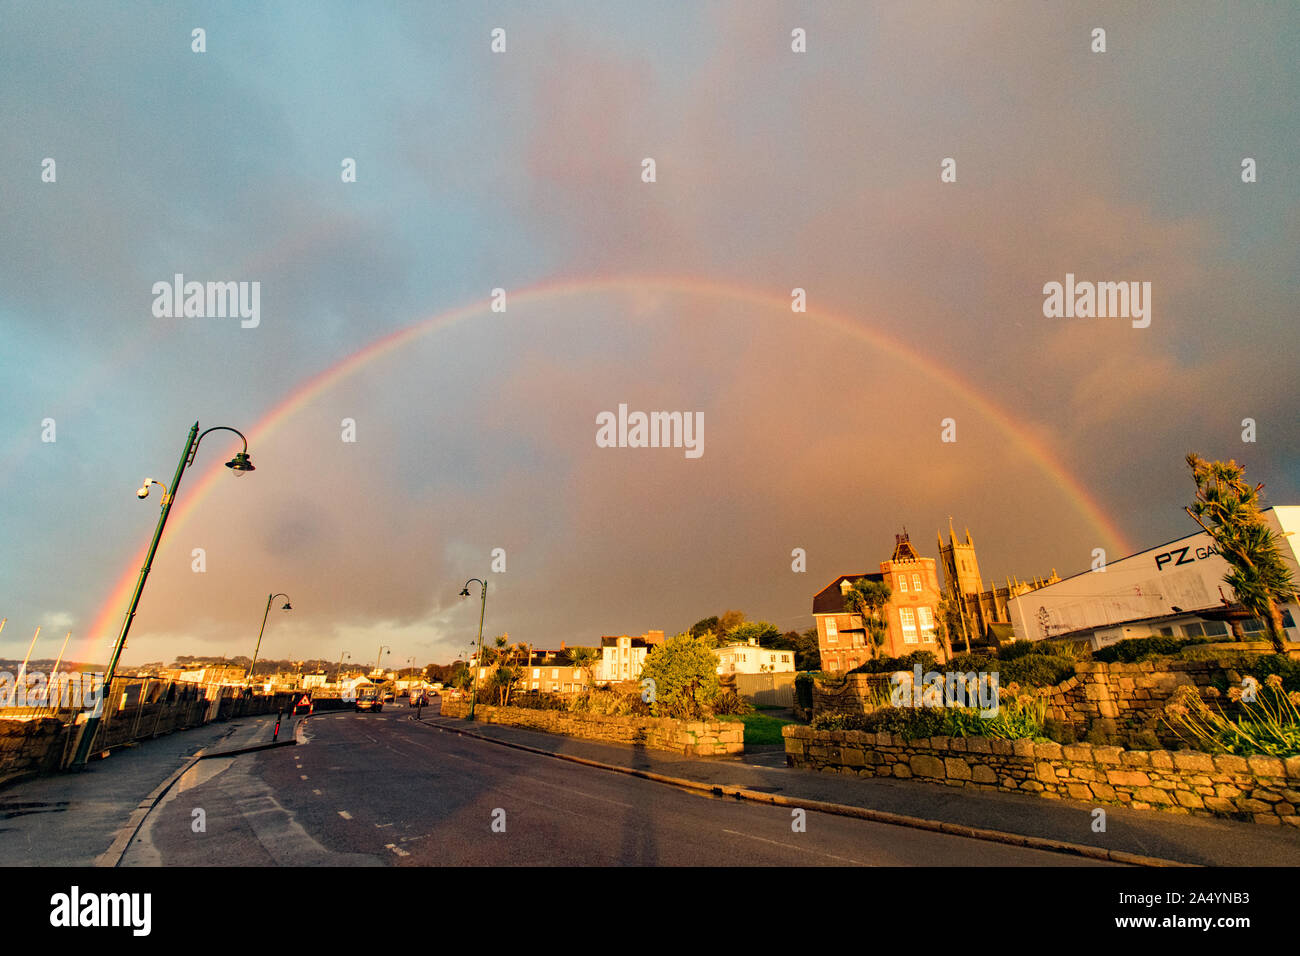 Penzance, Cornwall, UK. 17th October 2019. UK Weather. Changeable weather for sunrise this morning, with sharp showers and rainbows just after sunrise in Penzance. Credit Simon Maycock / Alamy Live News. Stock Photo